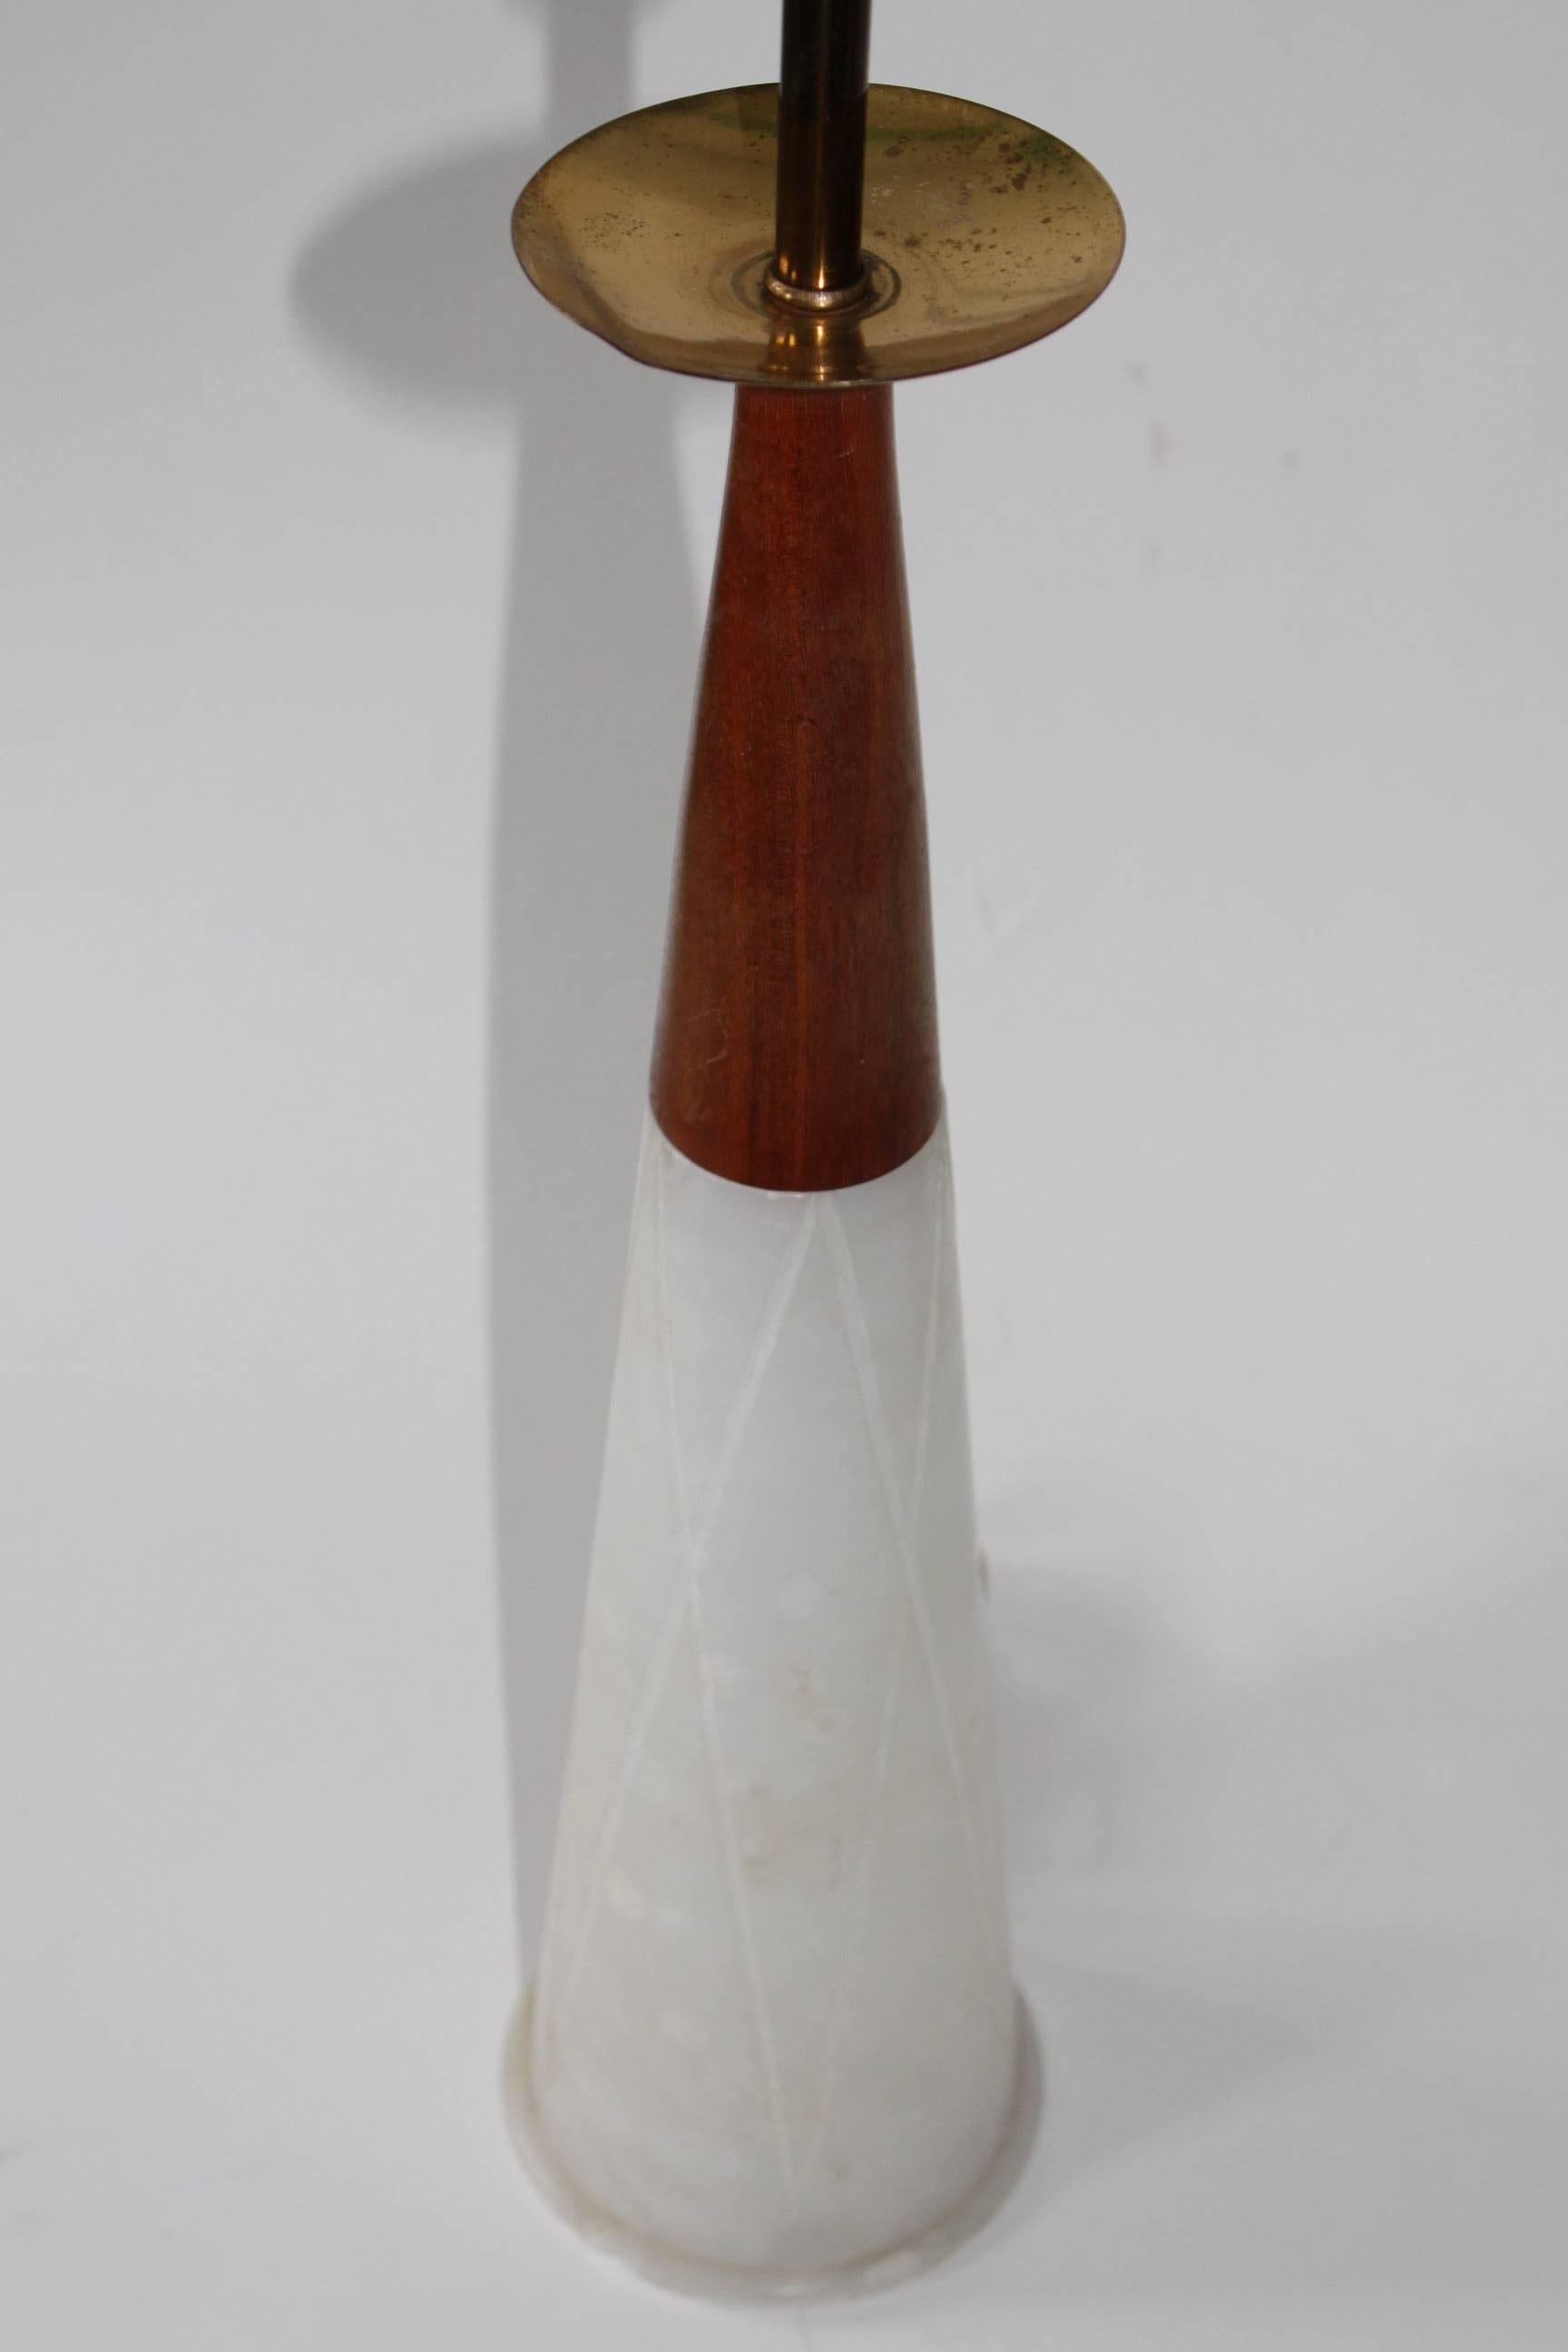 Mid-20th Century Italian 1950s Conical Marble Lamps with Brass and Walnut Accents